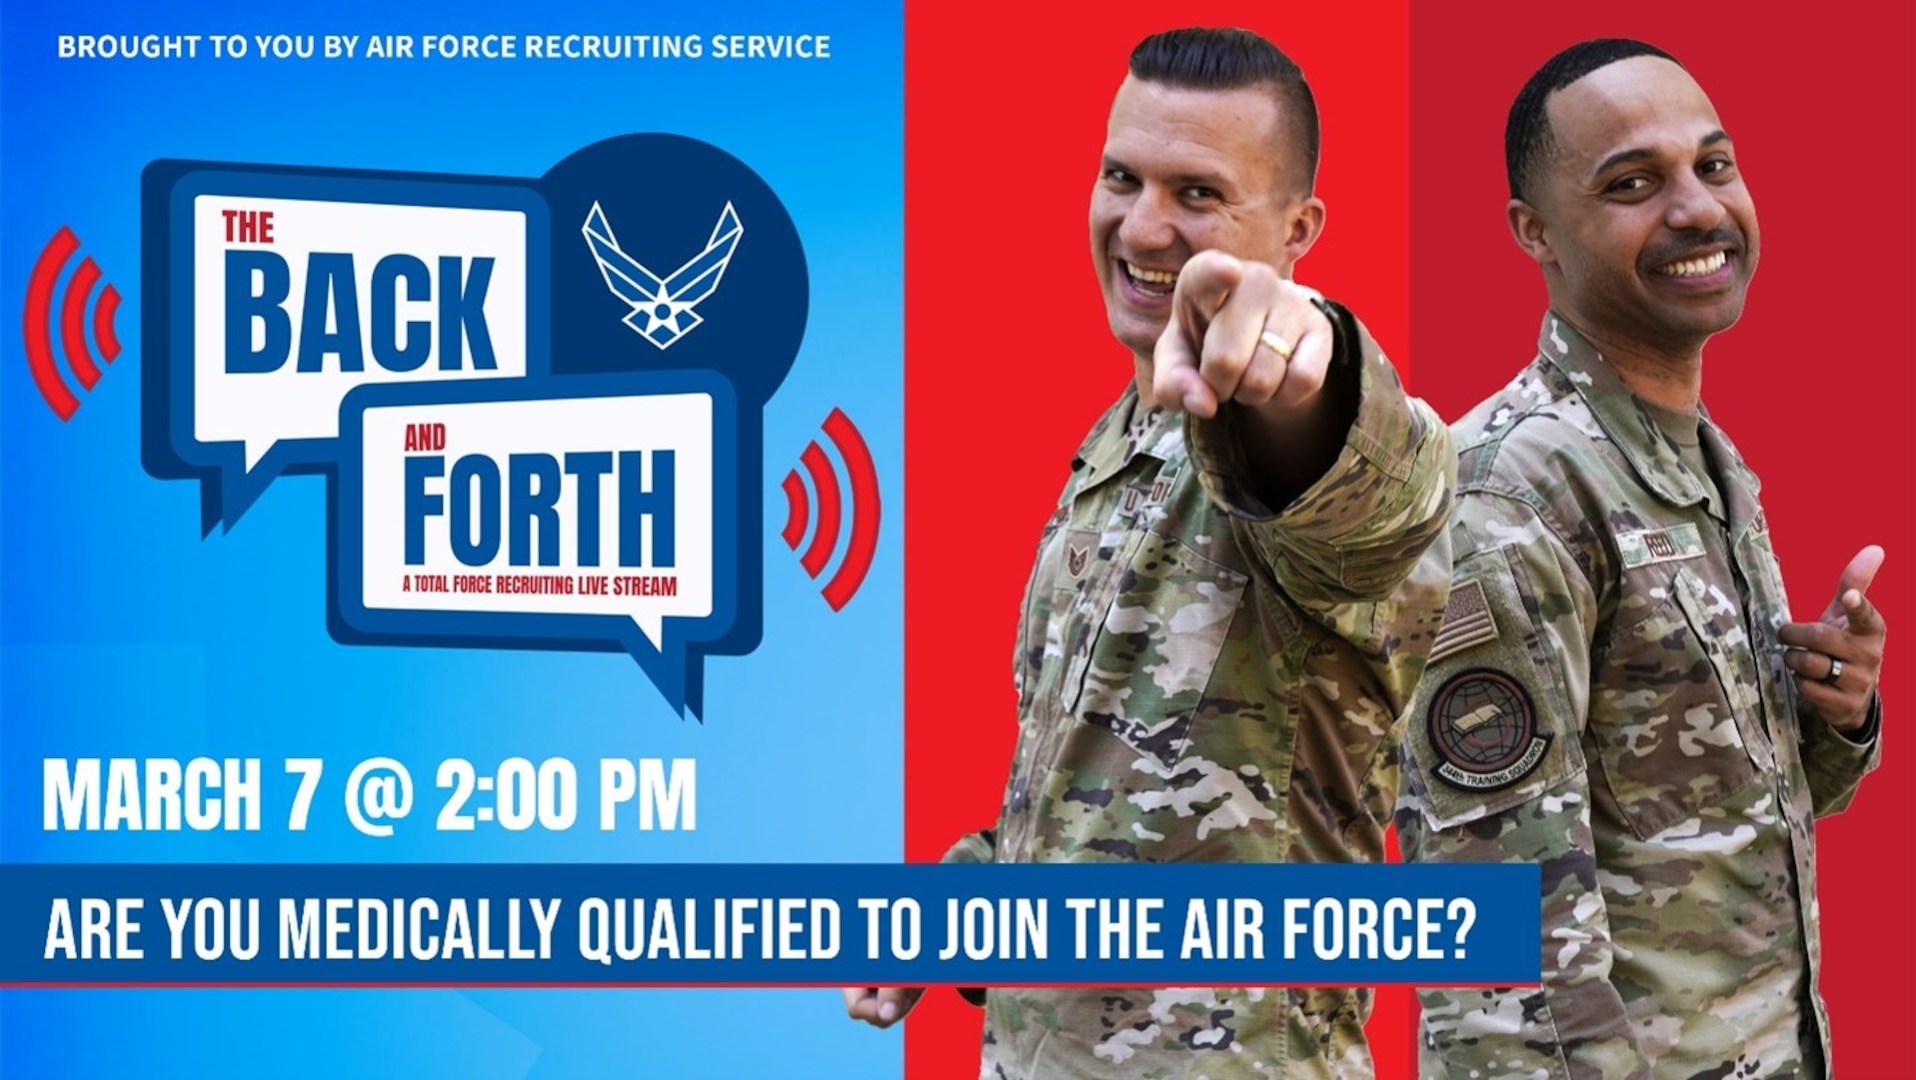 Two Airmen pointing in an advertisement with a question, "Are you medically qualified to join the Air Force?